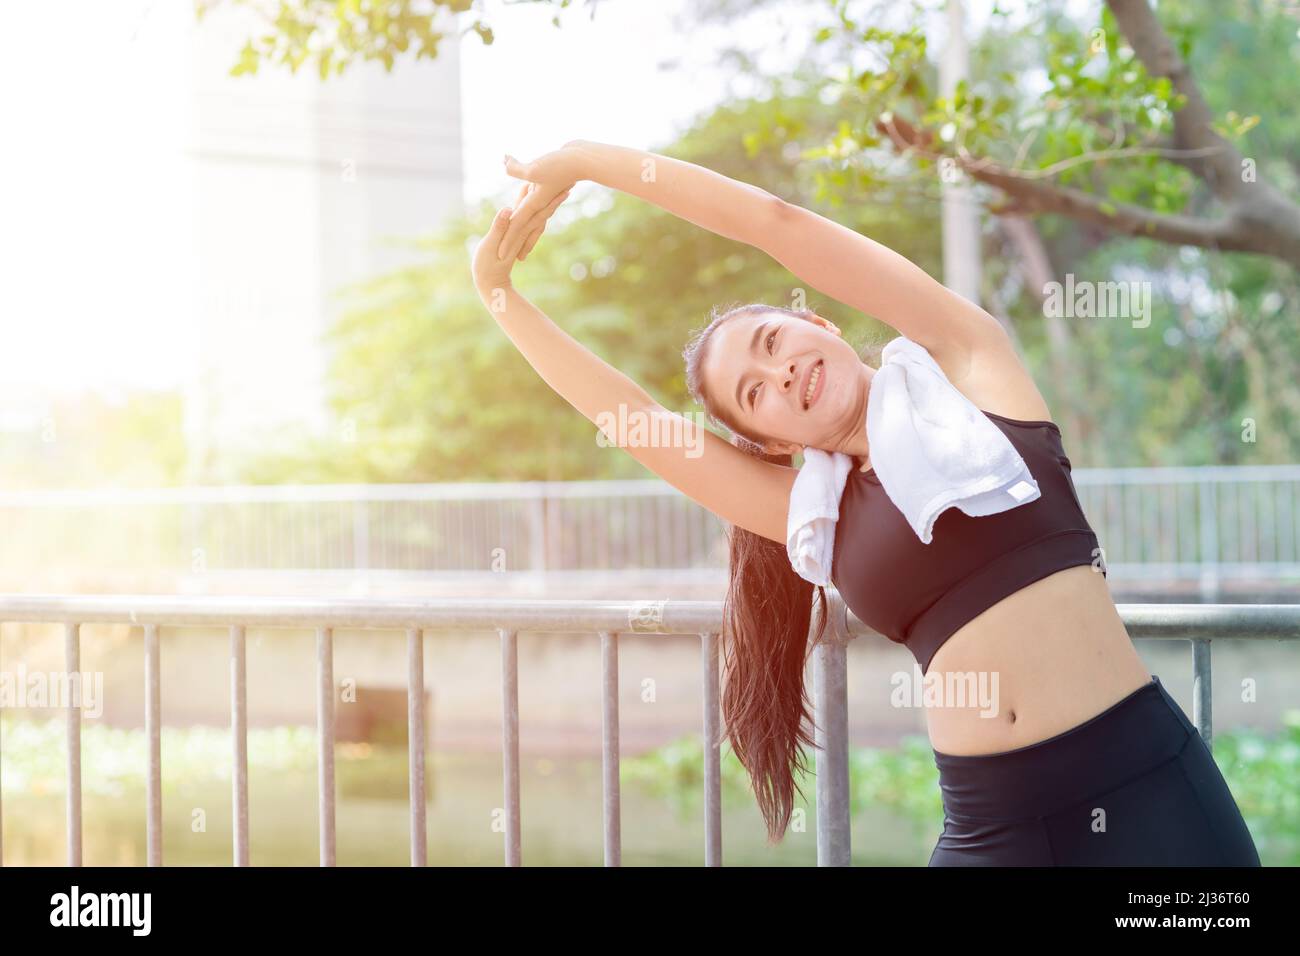 Asian healthy woman shoulder Stretching exercise outdoor morning Stock Photo